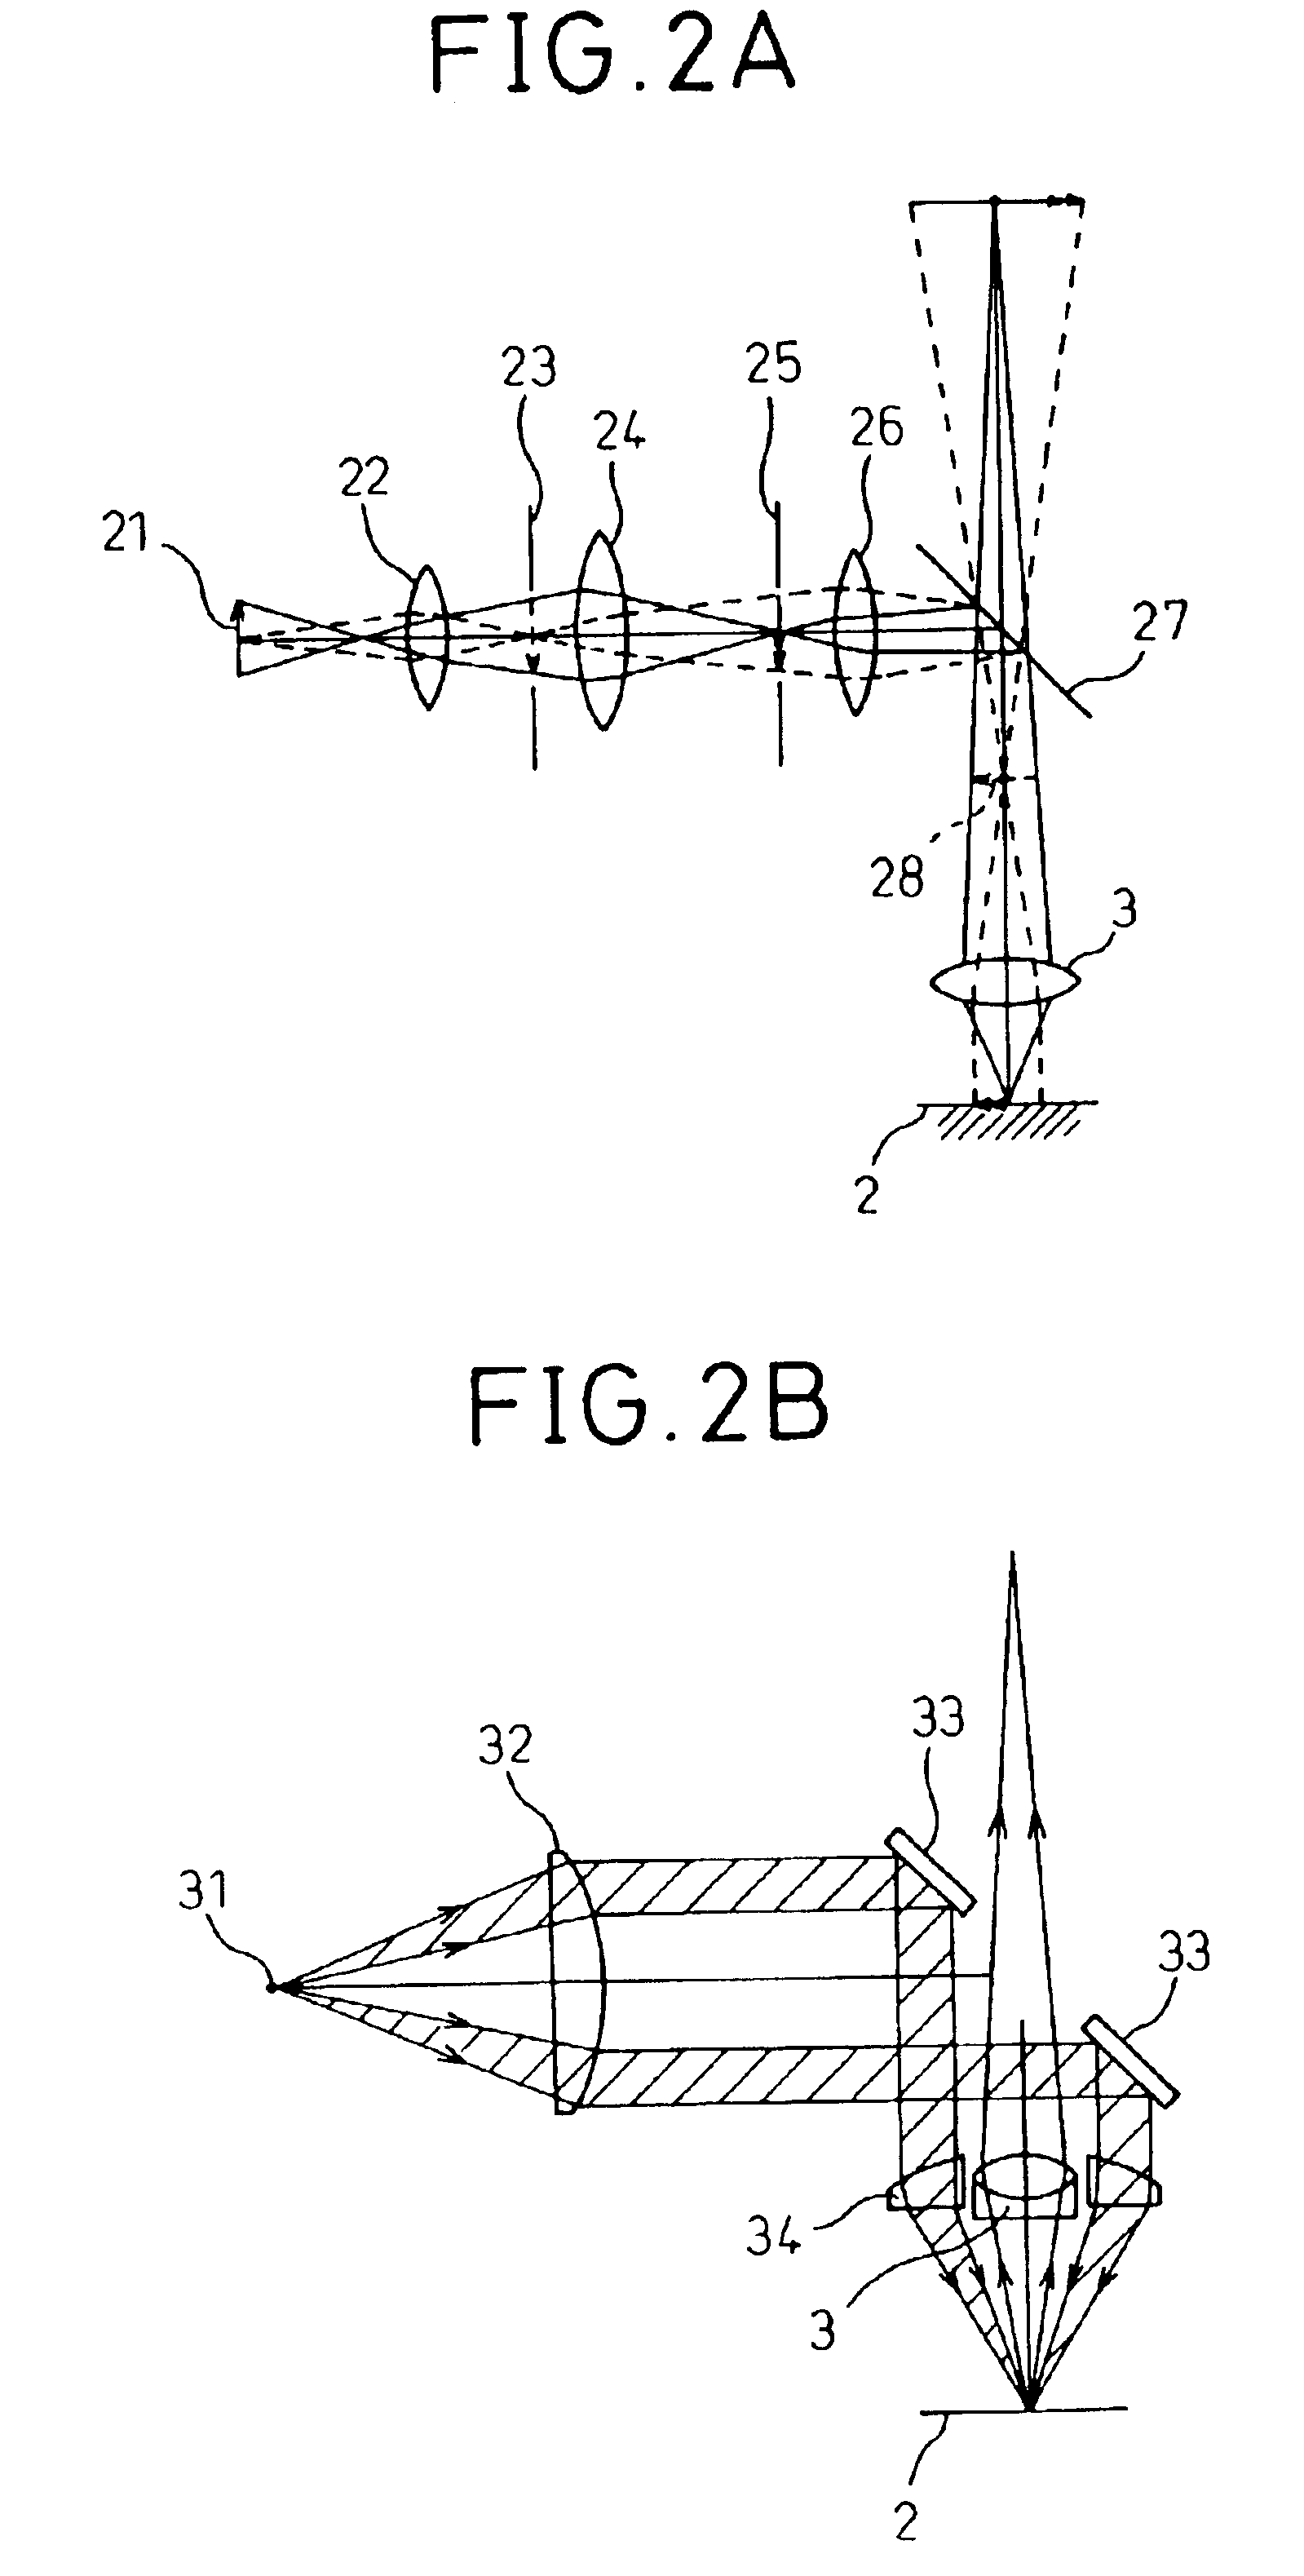 Wafer defect inspection machine having a dual illumination system